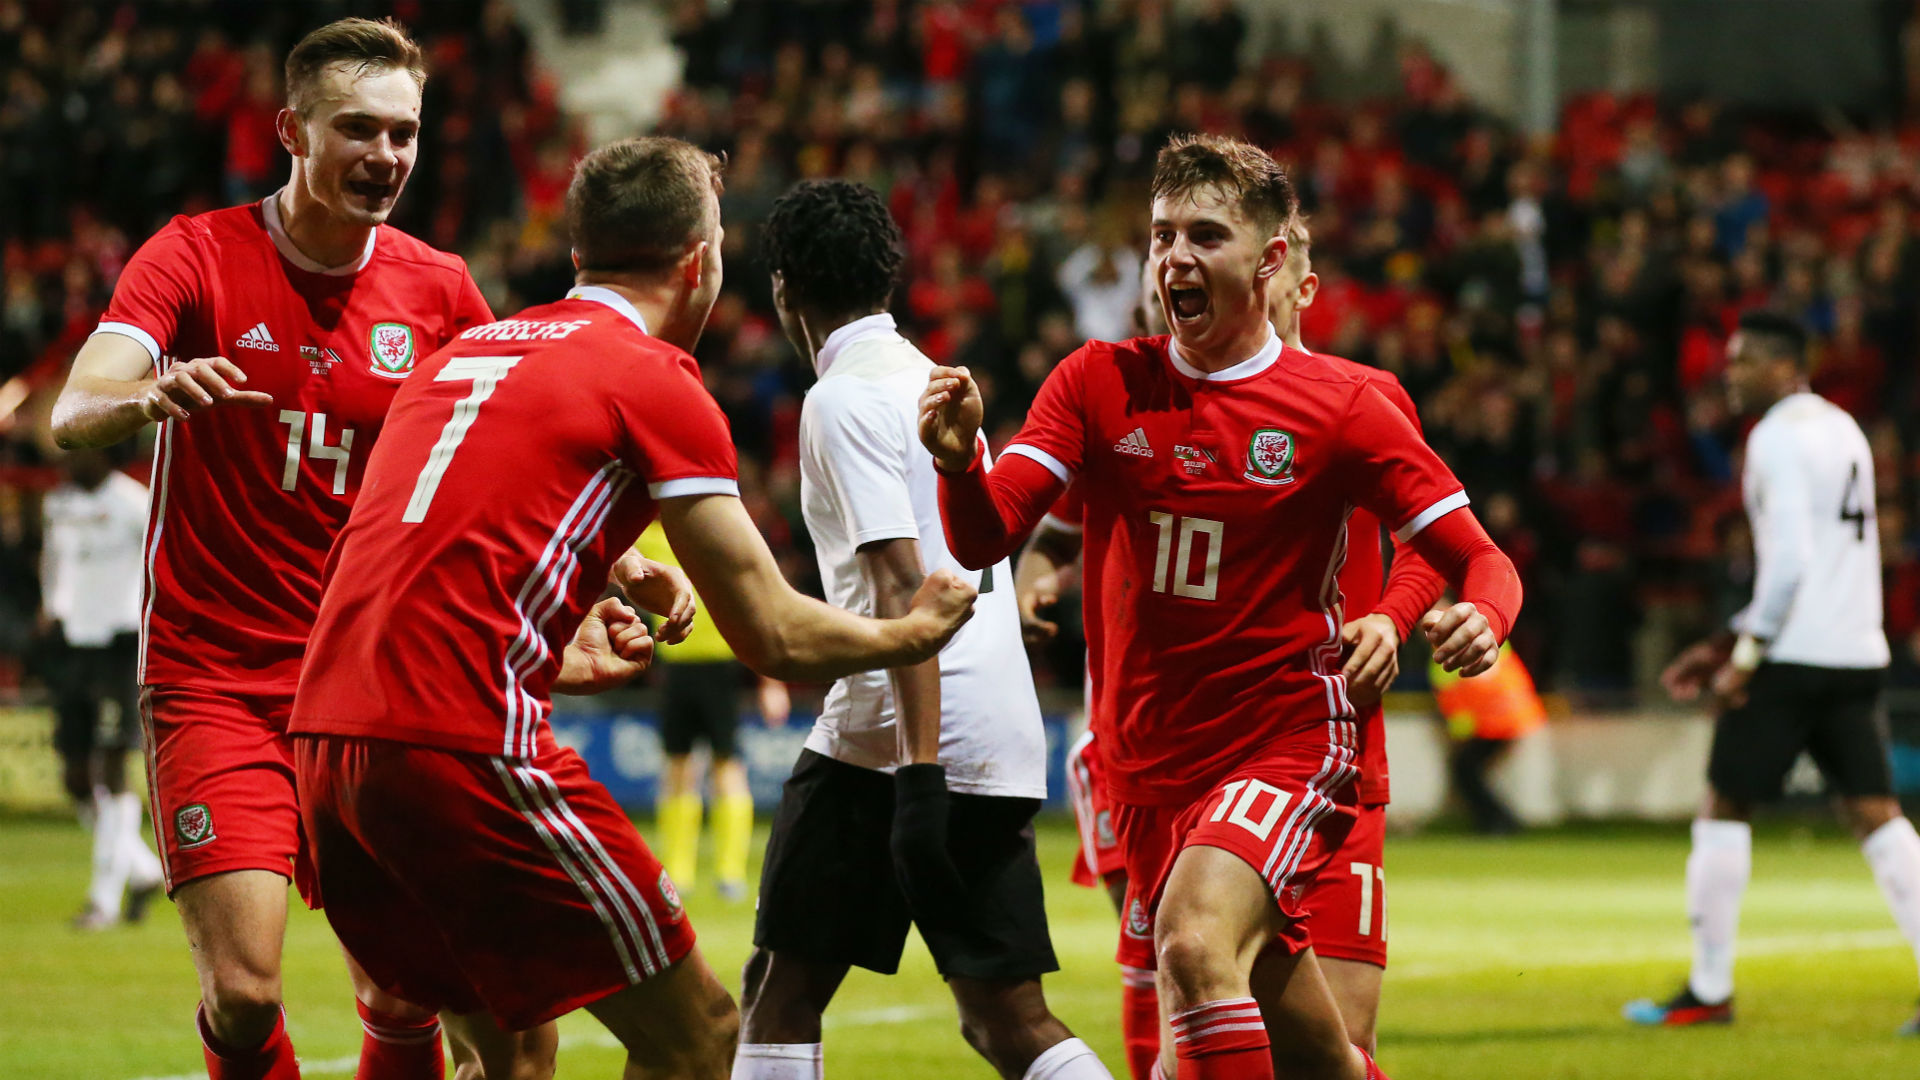 Ryan Giggs named an experimental Wales side against Trinidad and Tobago, and they had to wait for a late Ben Woodburn goal to claim the win.